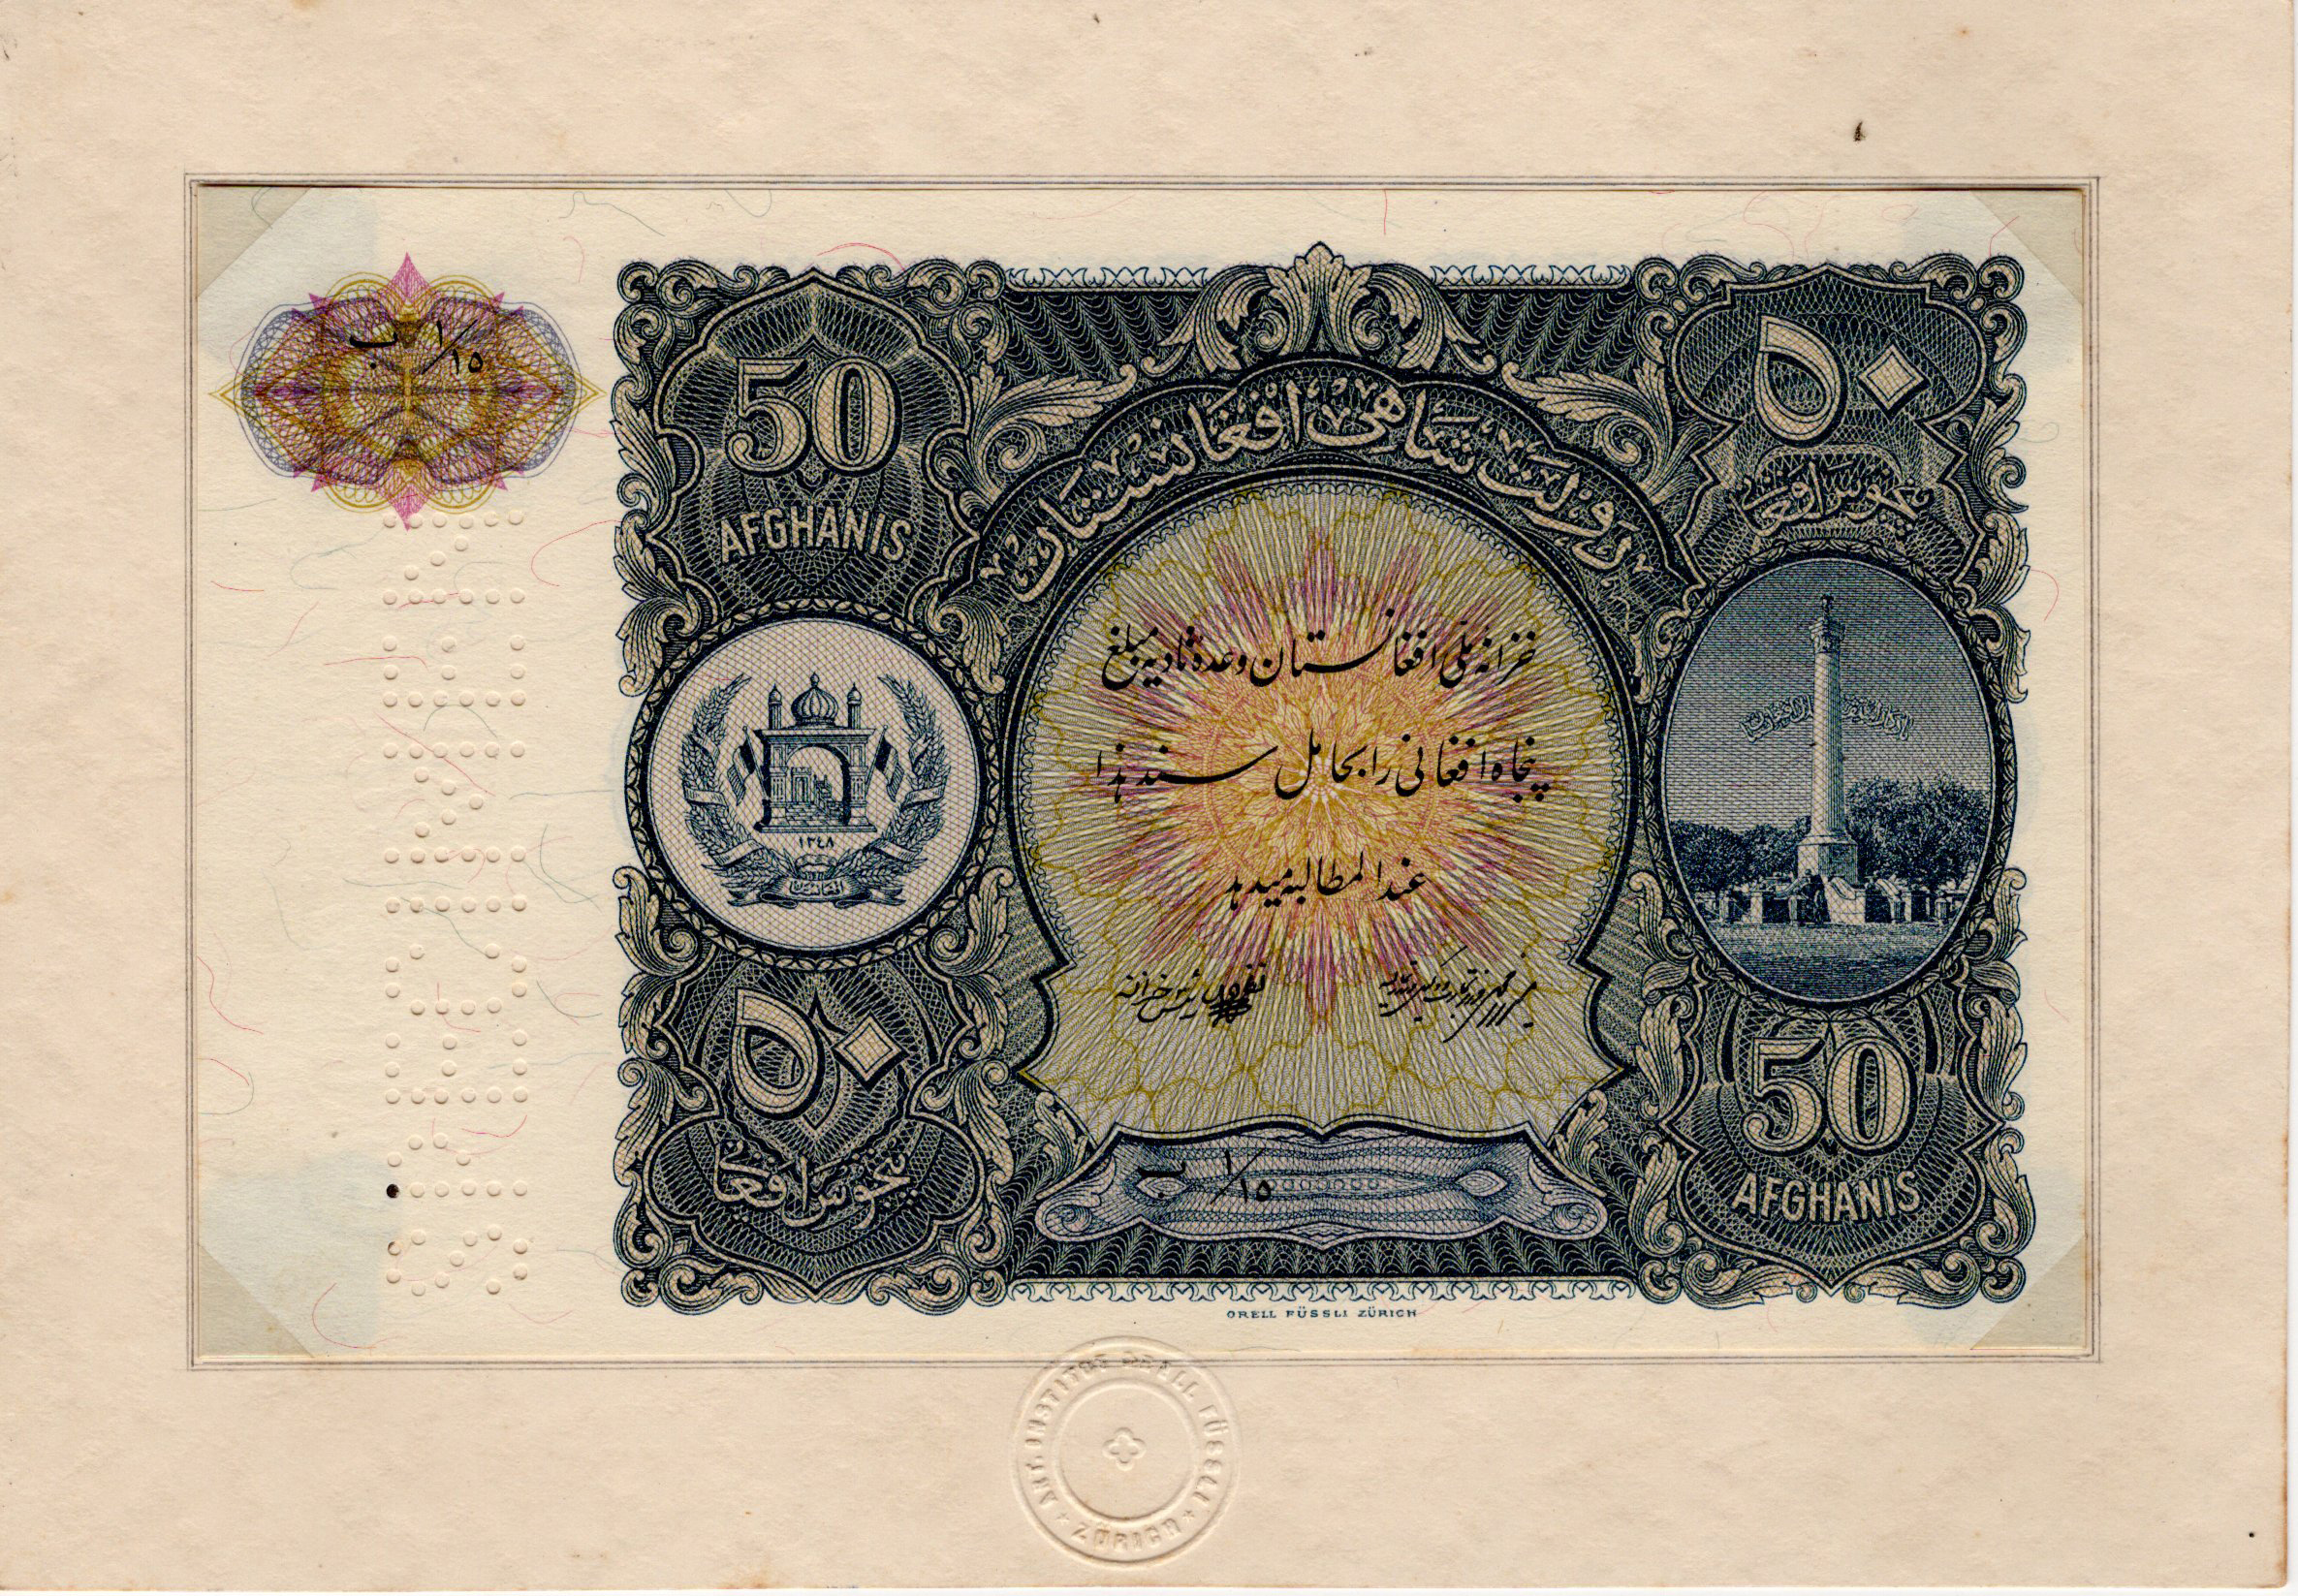 Afghanistan 50 Afghanis not dated, a very scarce SPECIMEN with no serial number printed by Art